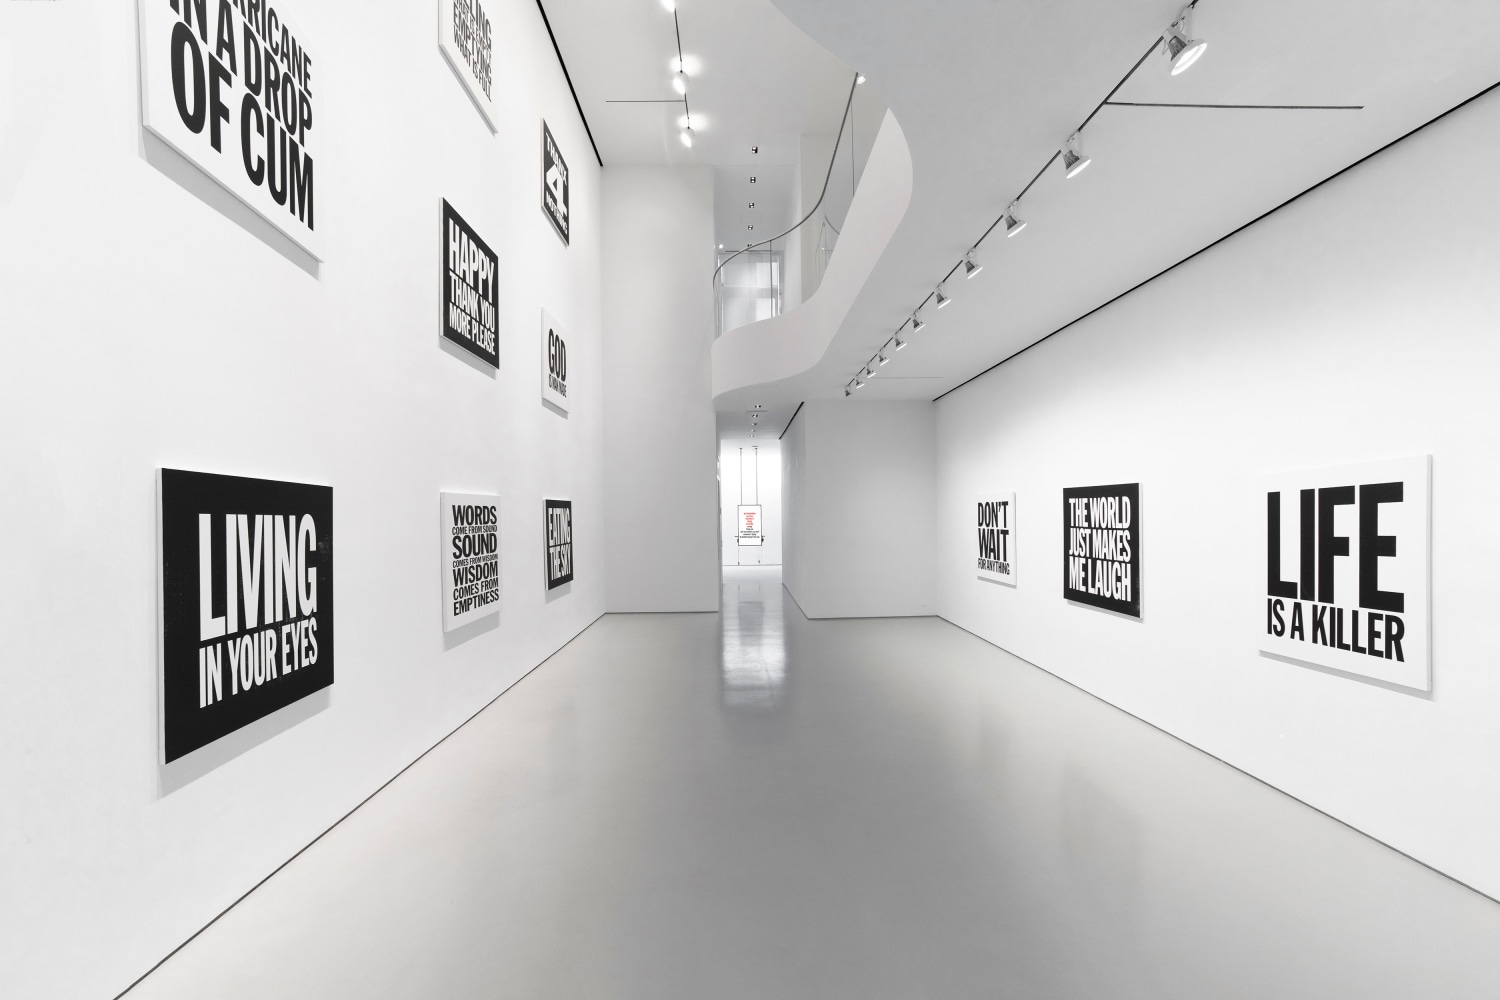 Installation view of&amp;nbsp;John Giorno at Sperone Westwater. Image Courtesty of Sperone Westwater, New York.